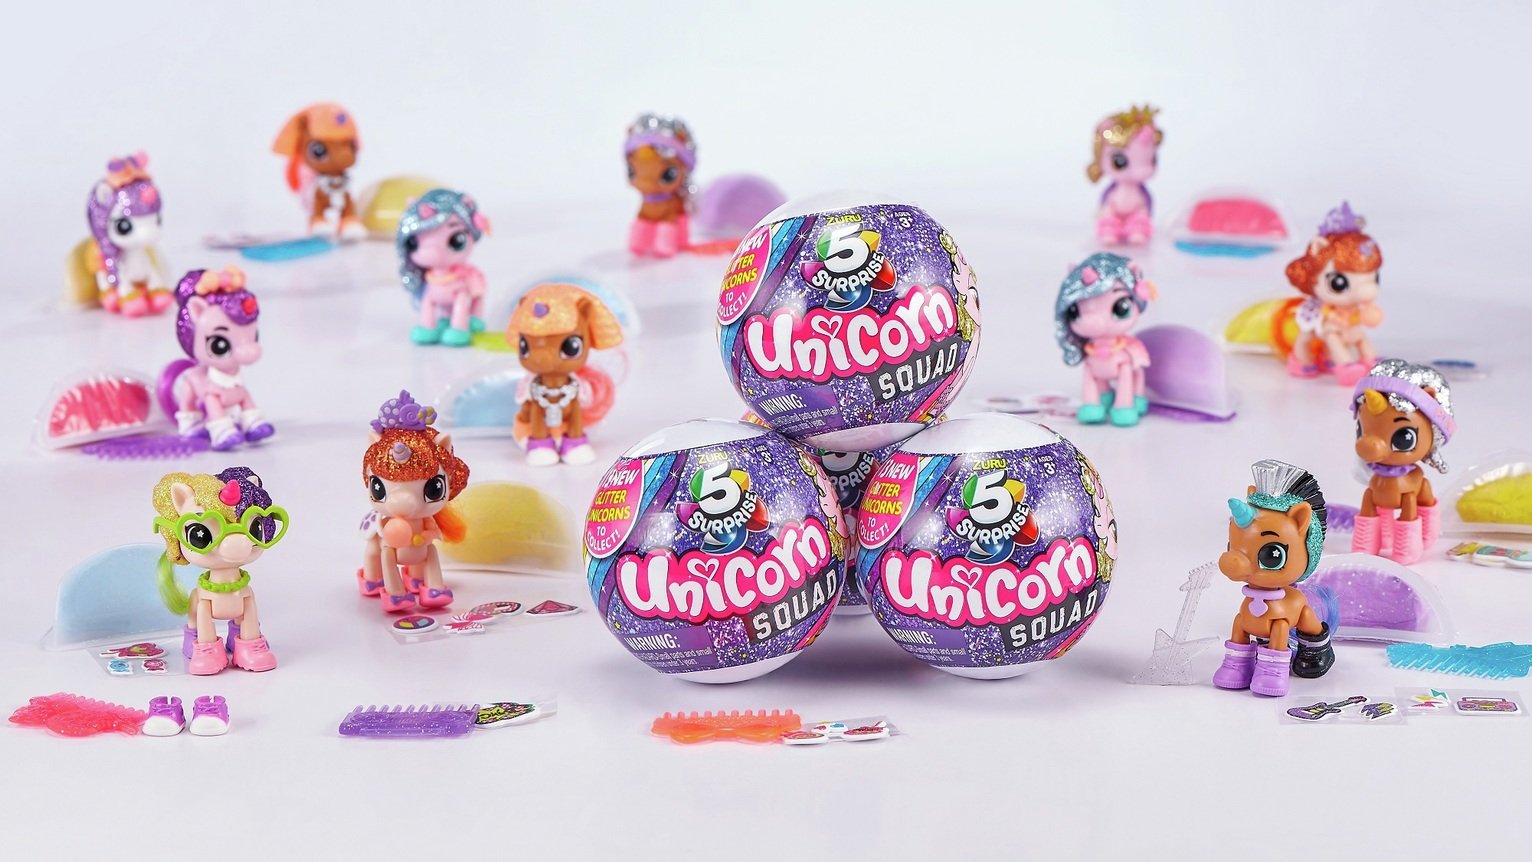 5 Surprise Unicorn Squad Series 2 Pack in Tube Review